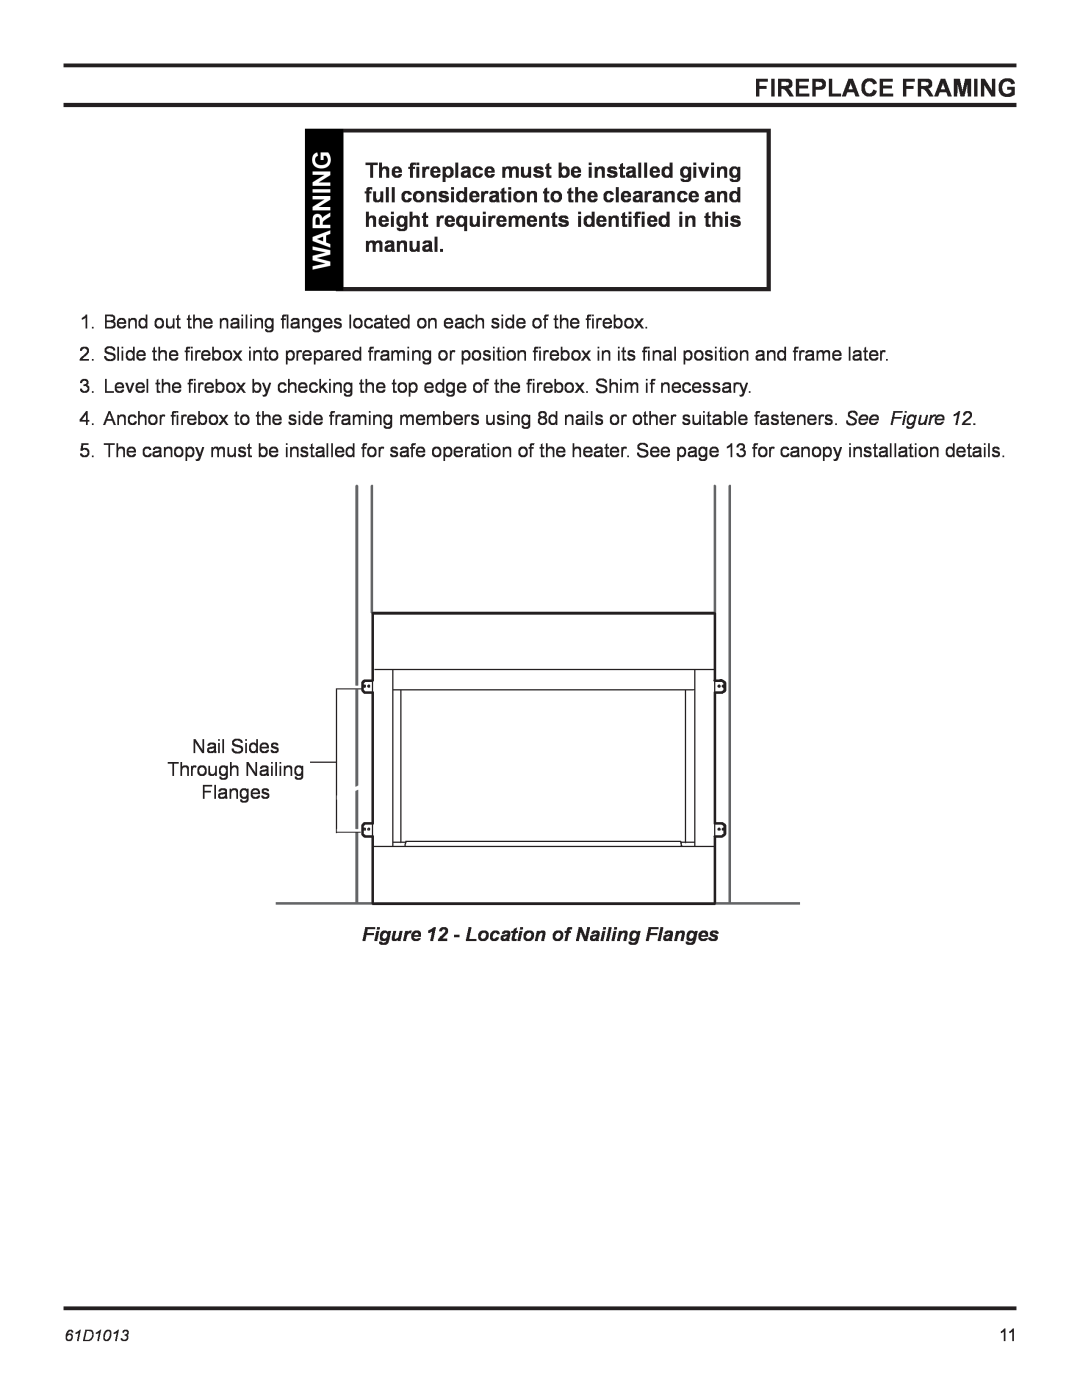 Monessen Hearth BUF400, BUF500 manual fireplace framing, Location of Nailing Flanges 